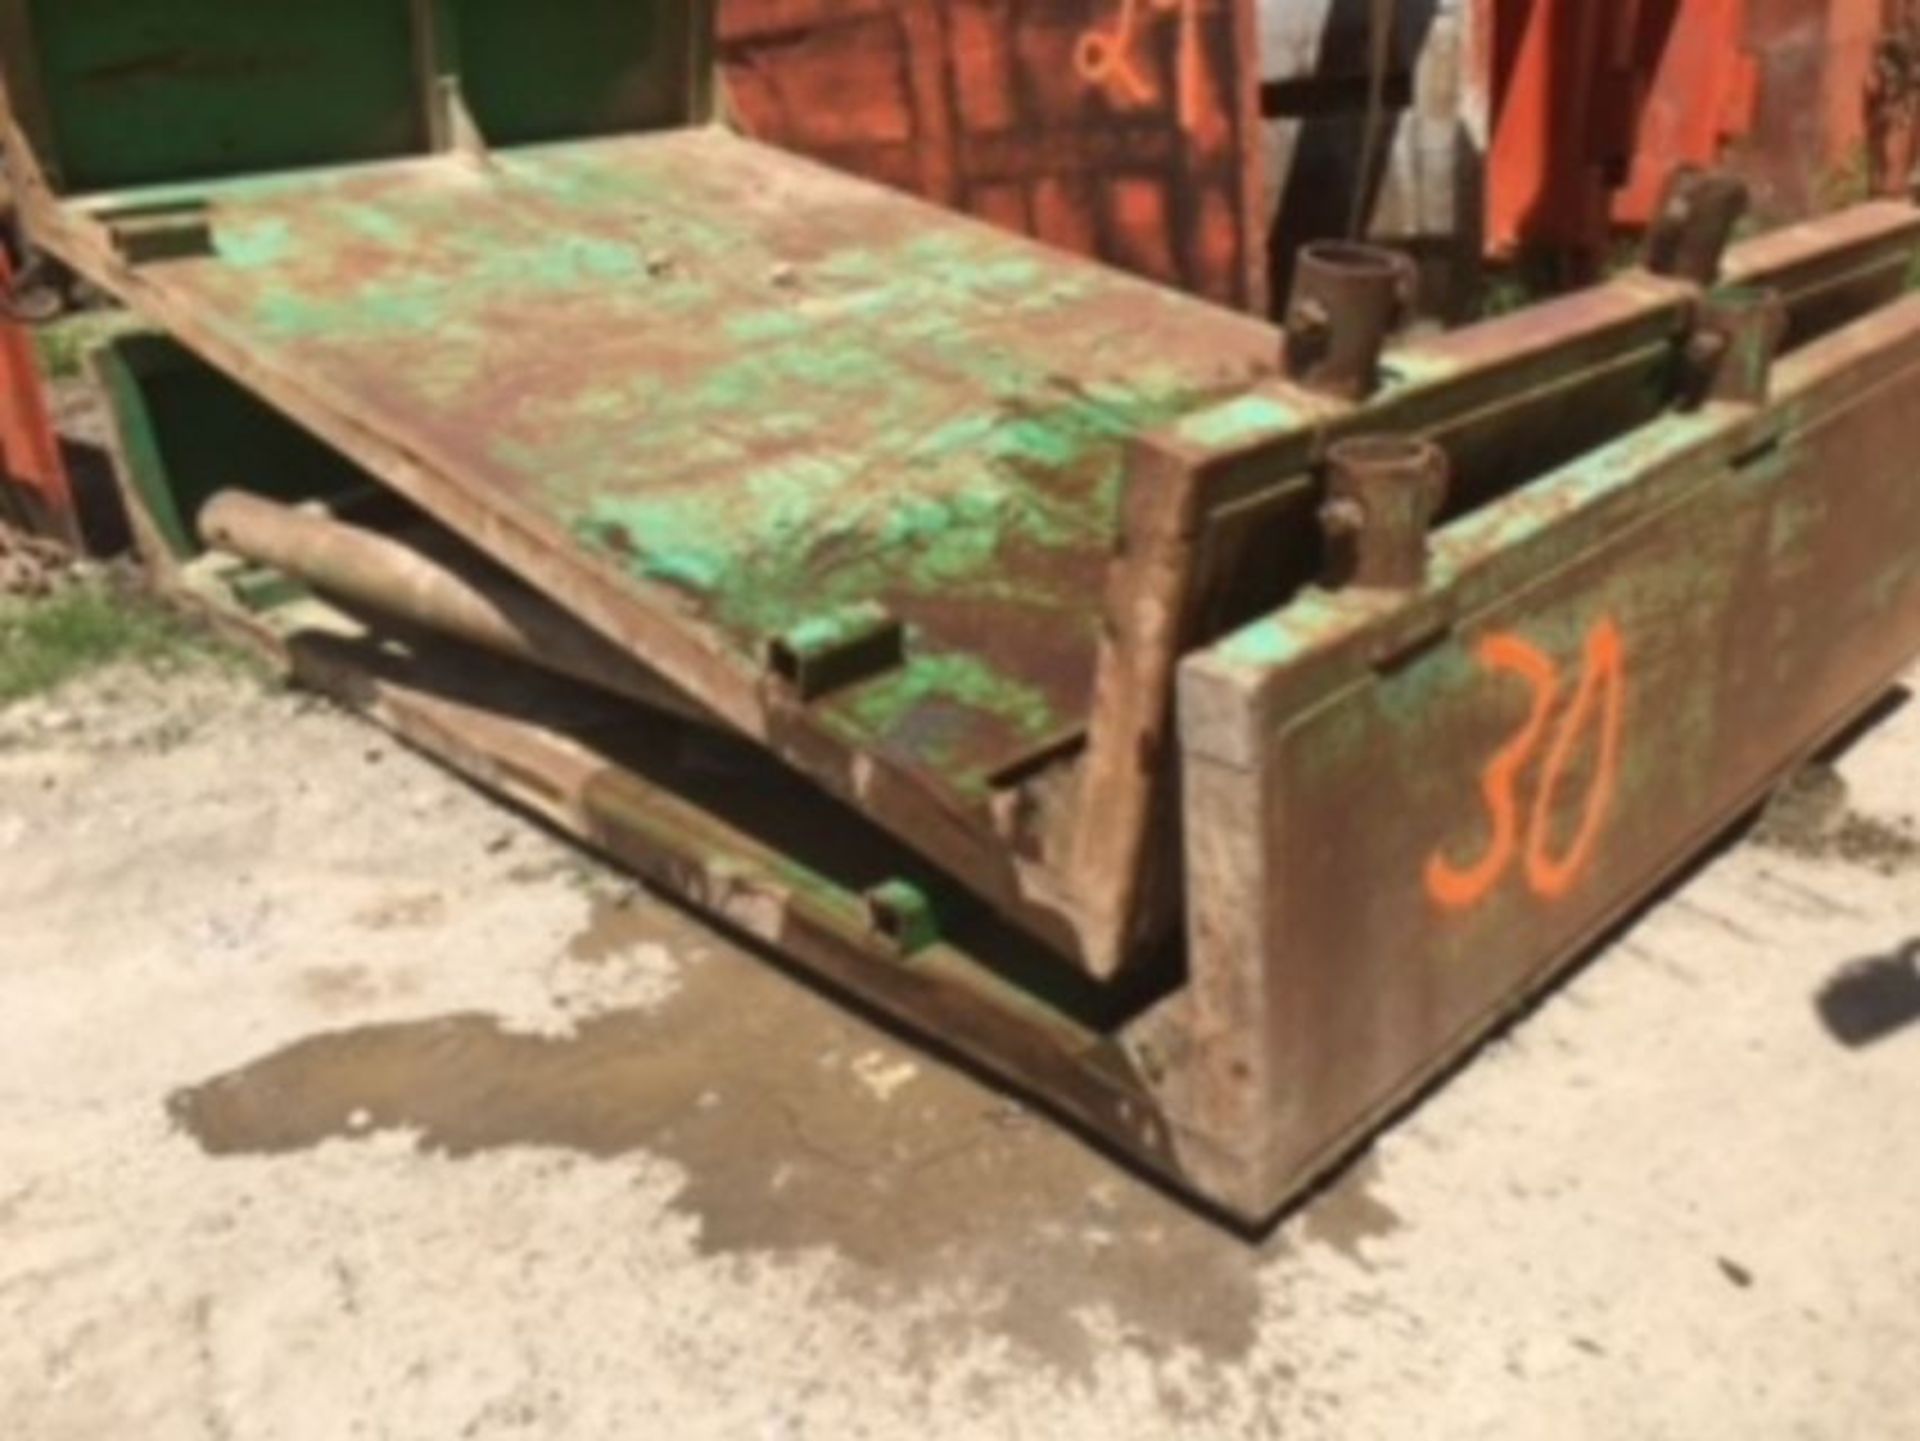 12'8" x 7'3" man hole box. Comes with set of 8' spreaders.